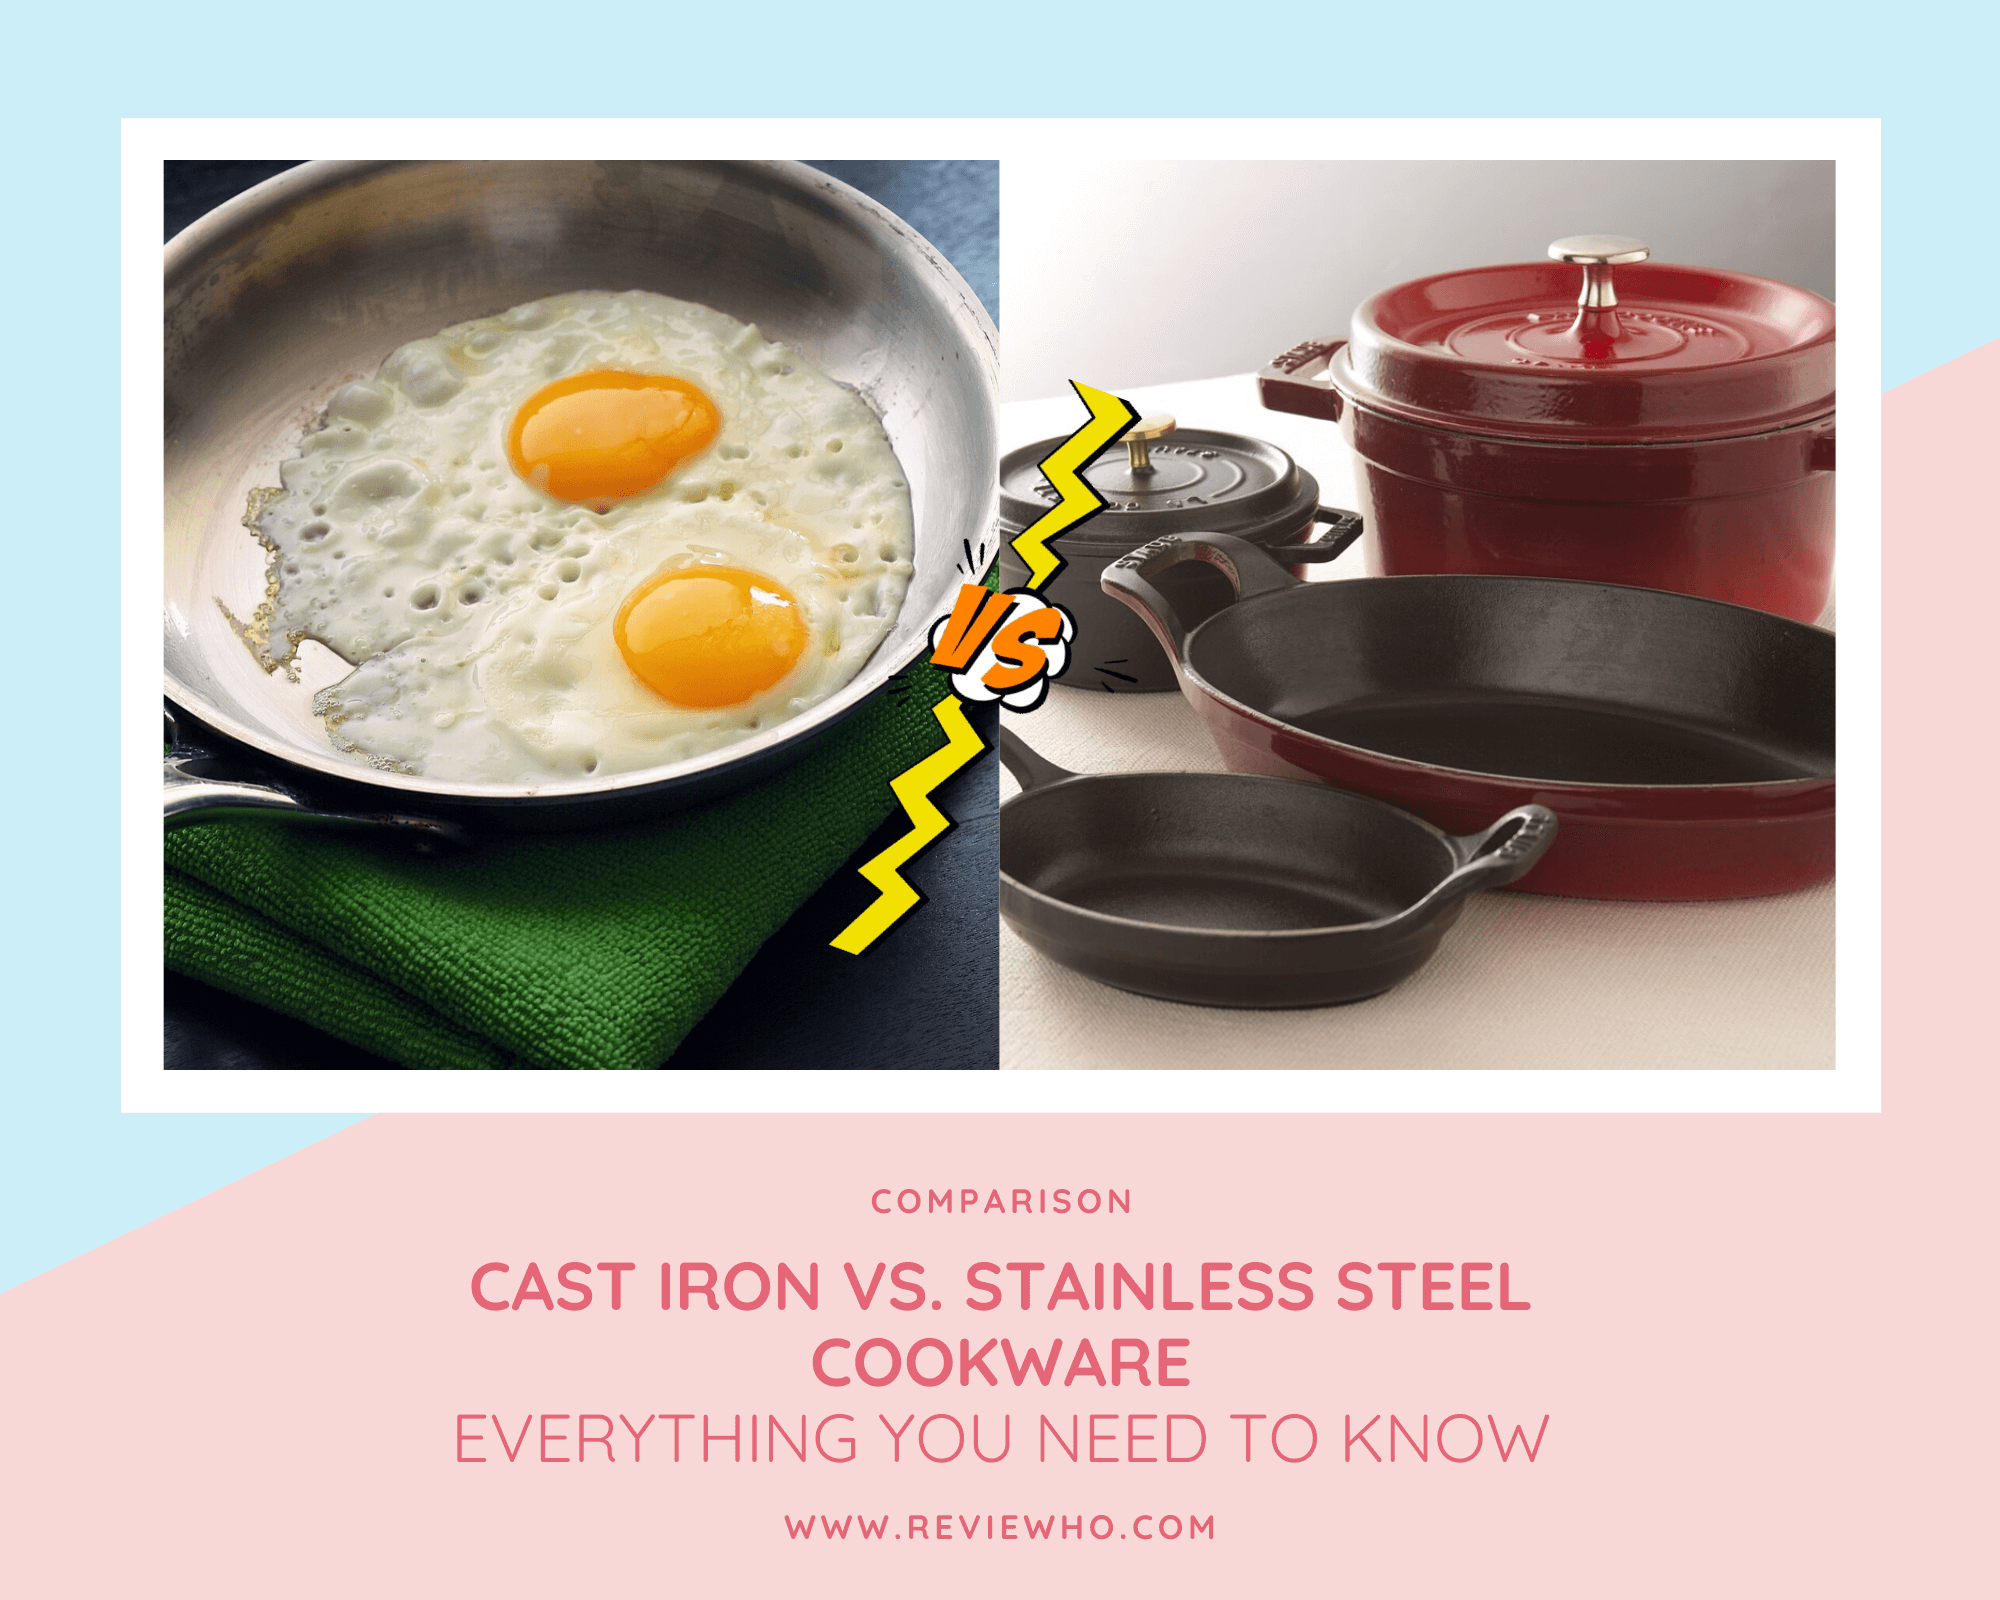 A comparison between stainless steel and cast iron cookware